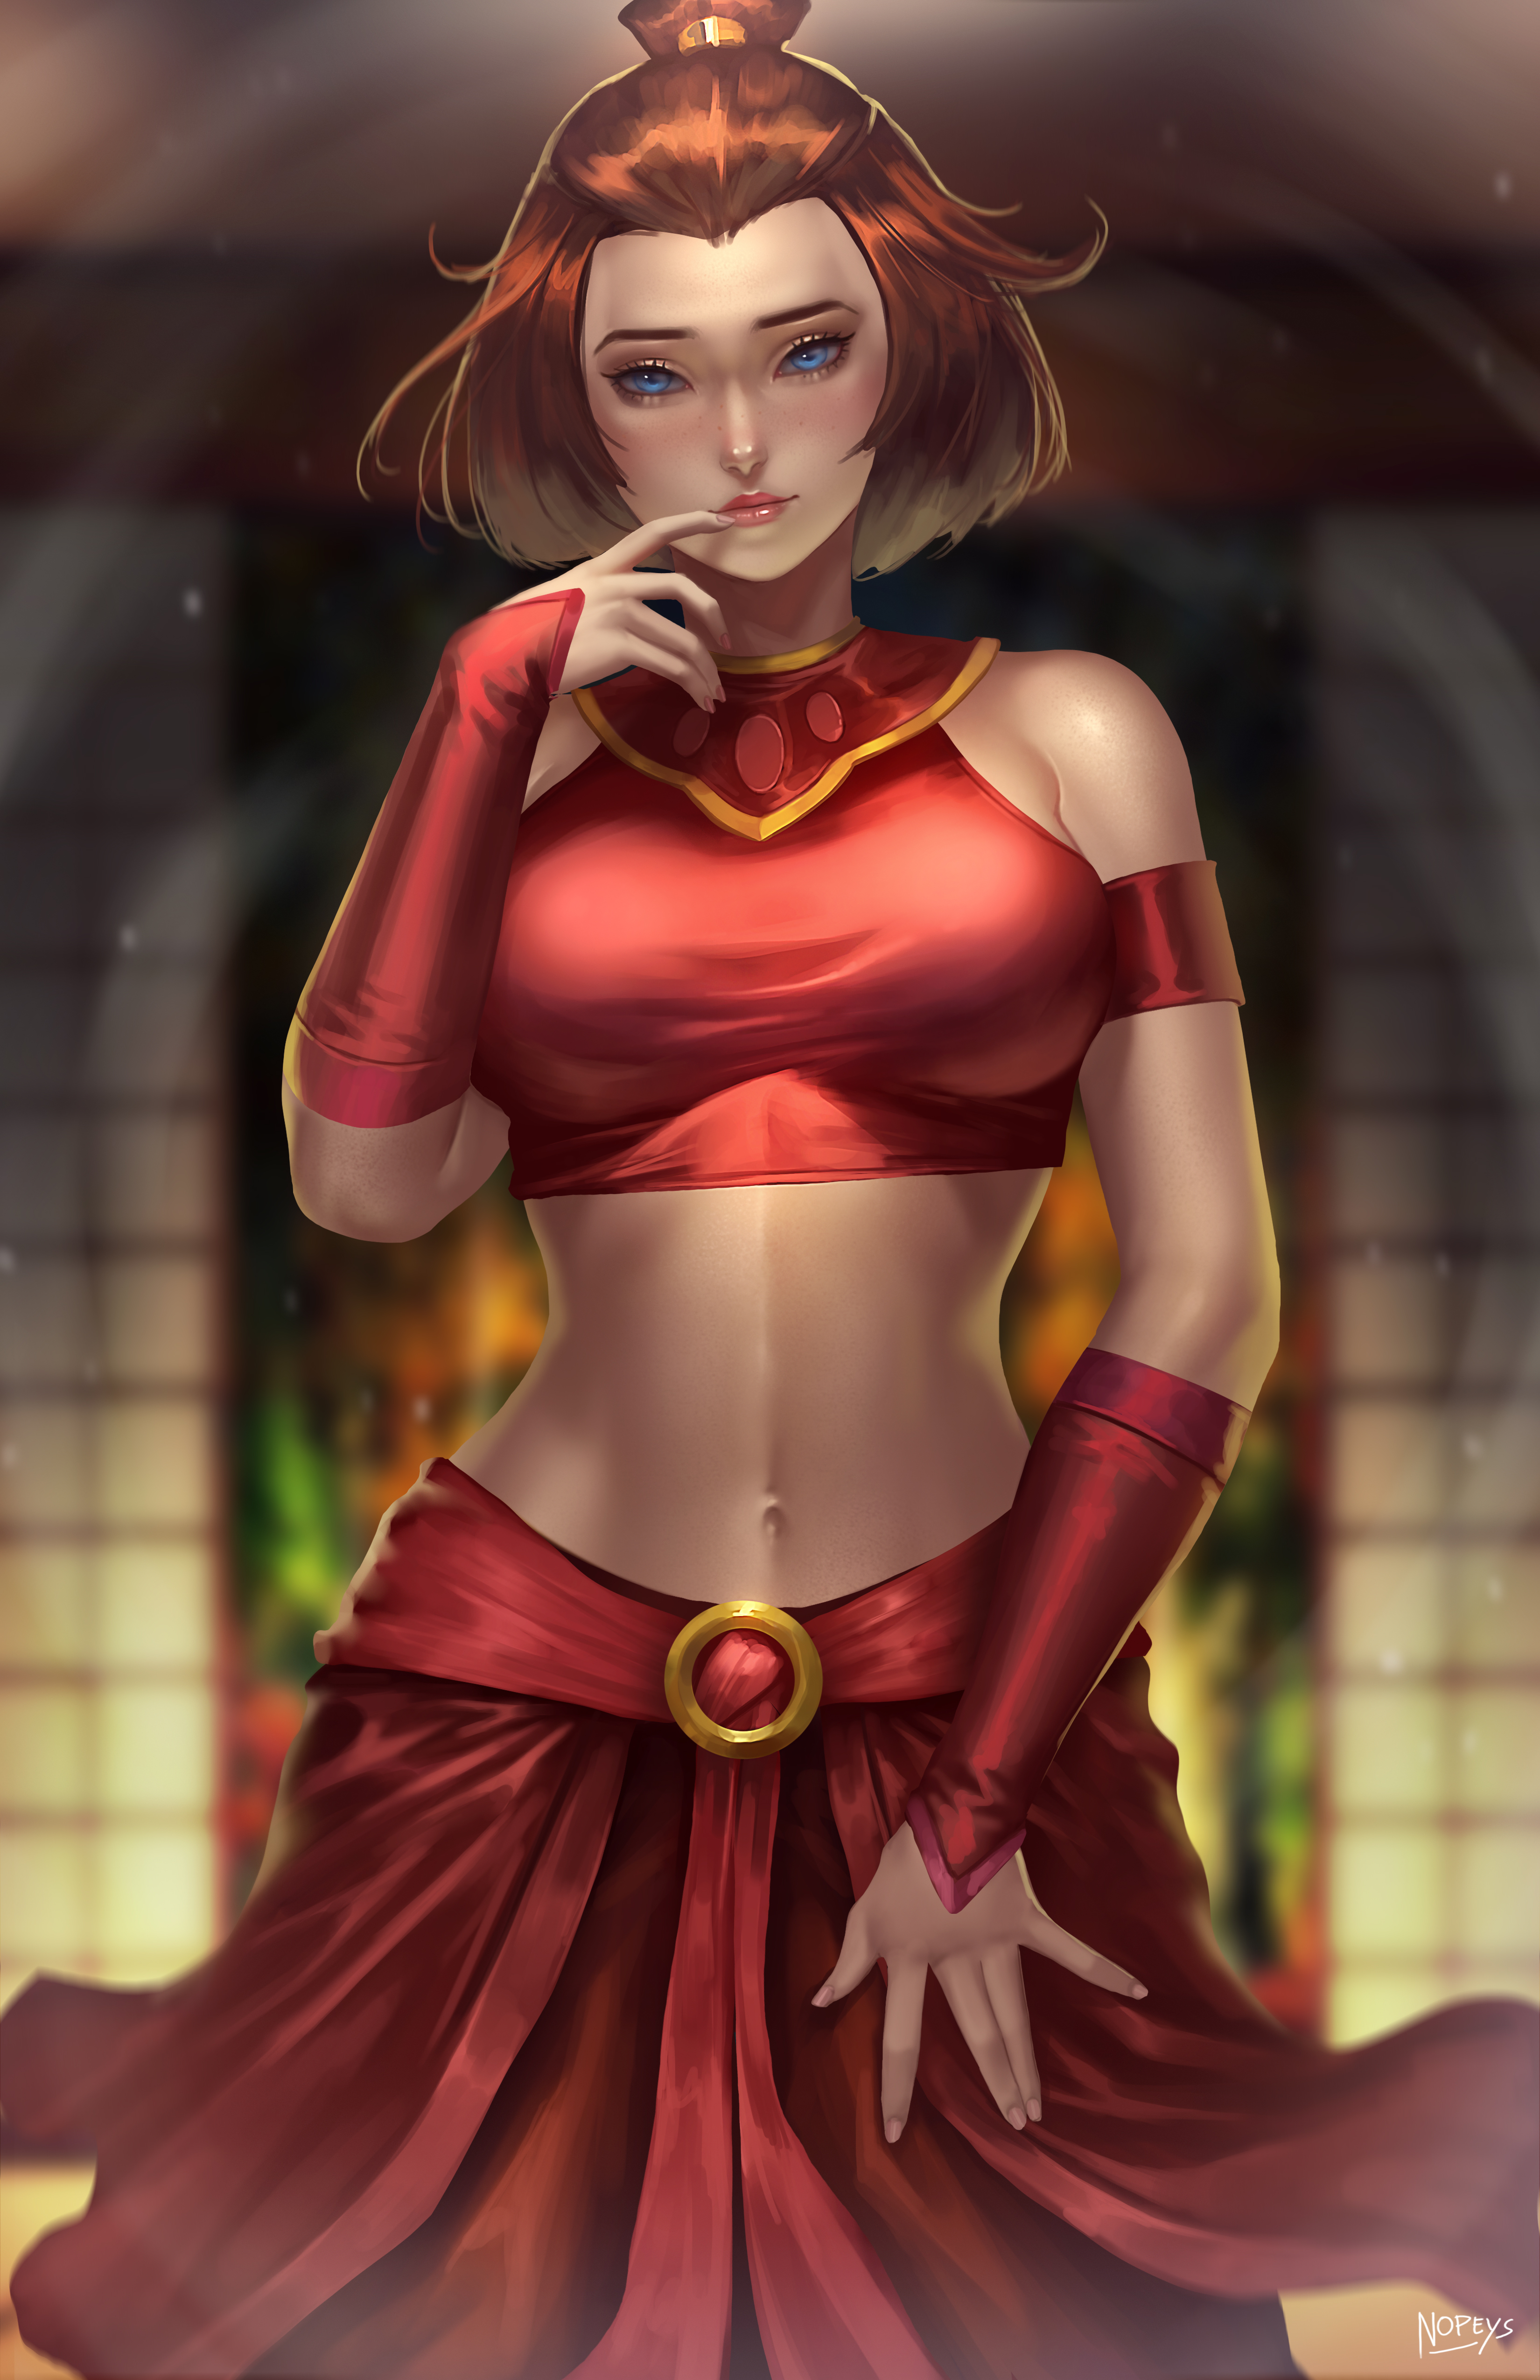 General 3300x5100 Suki Avatar: The Last Airbender animated series fictional character brunette blue eyes looking at viewer red tops red clothing curvy artwork drawing fan art Nopeys portrait display watermarked digital art